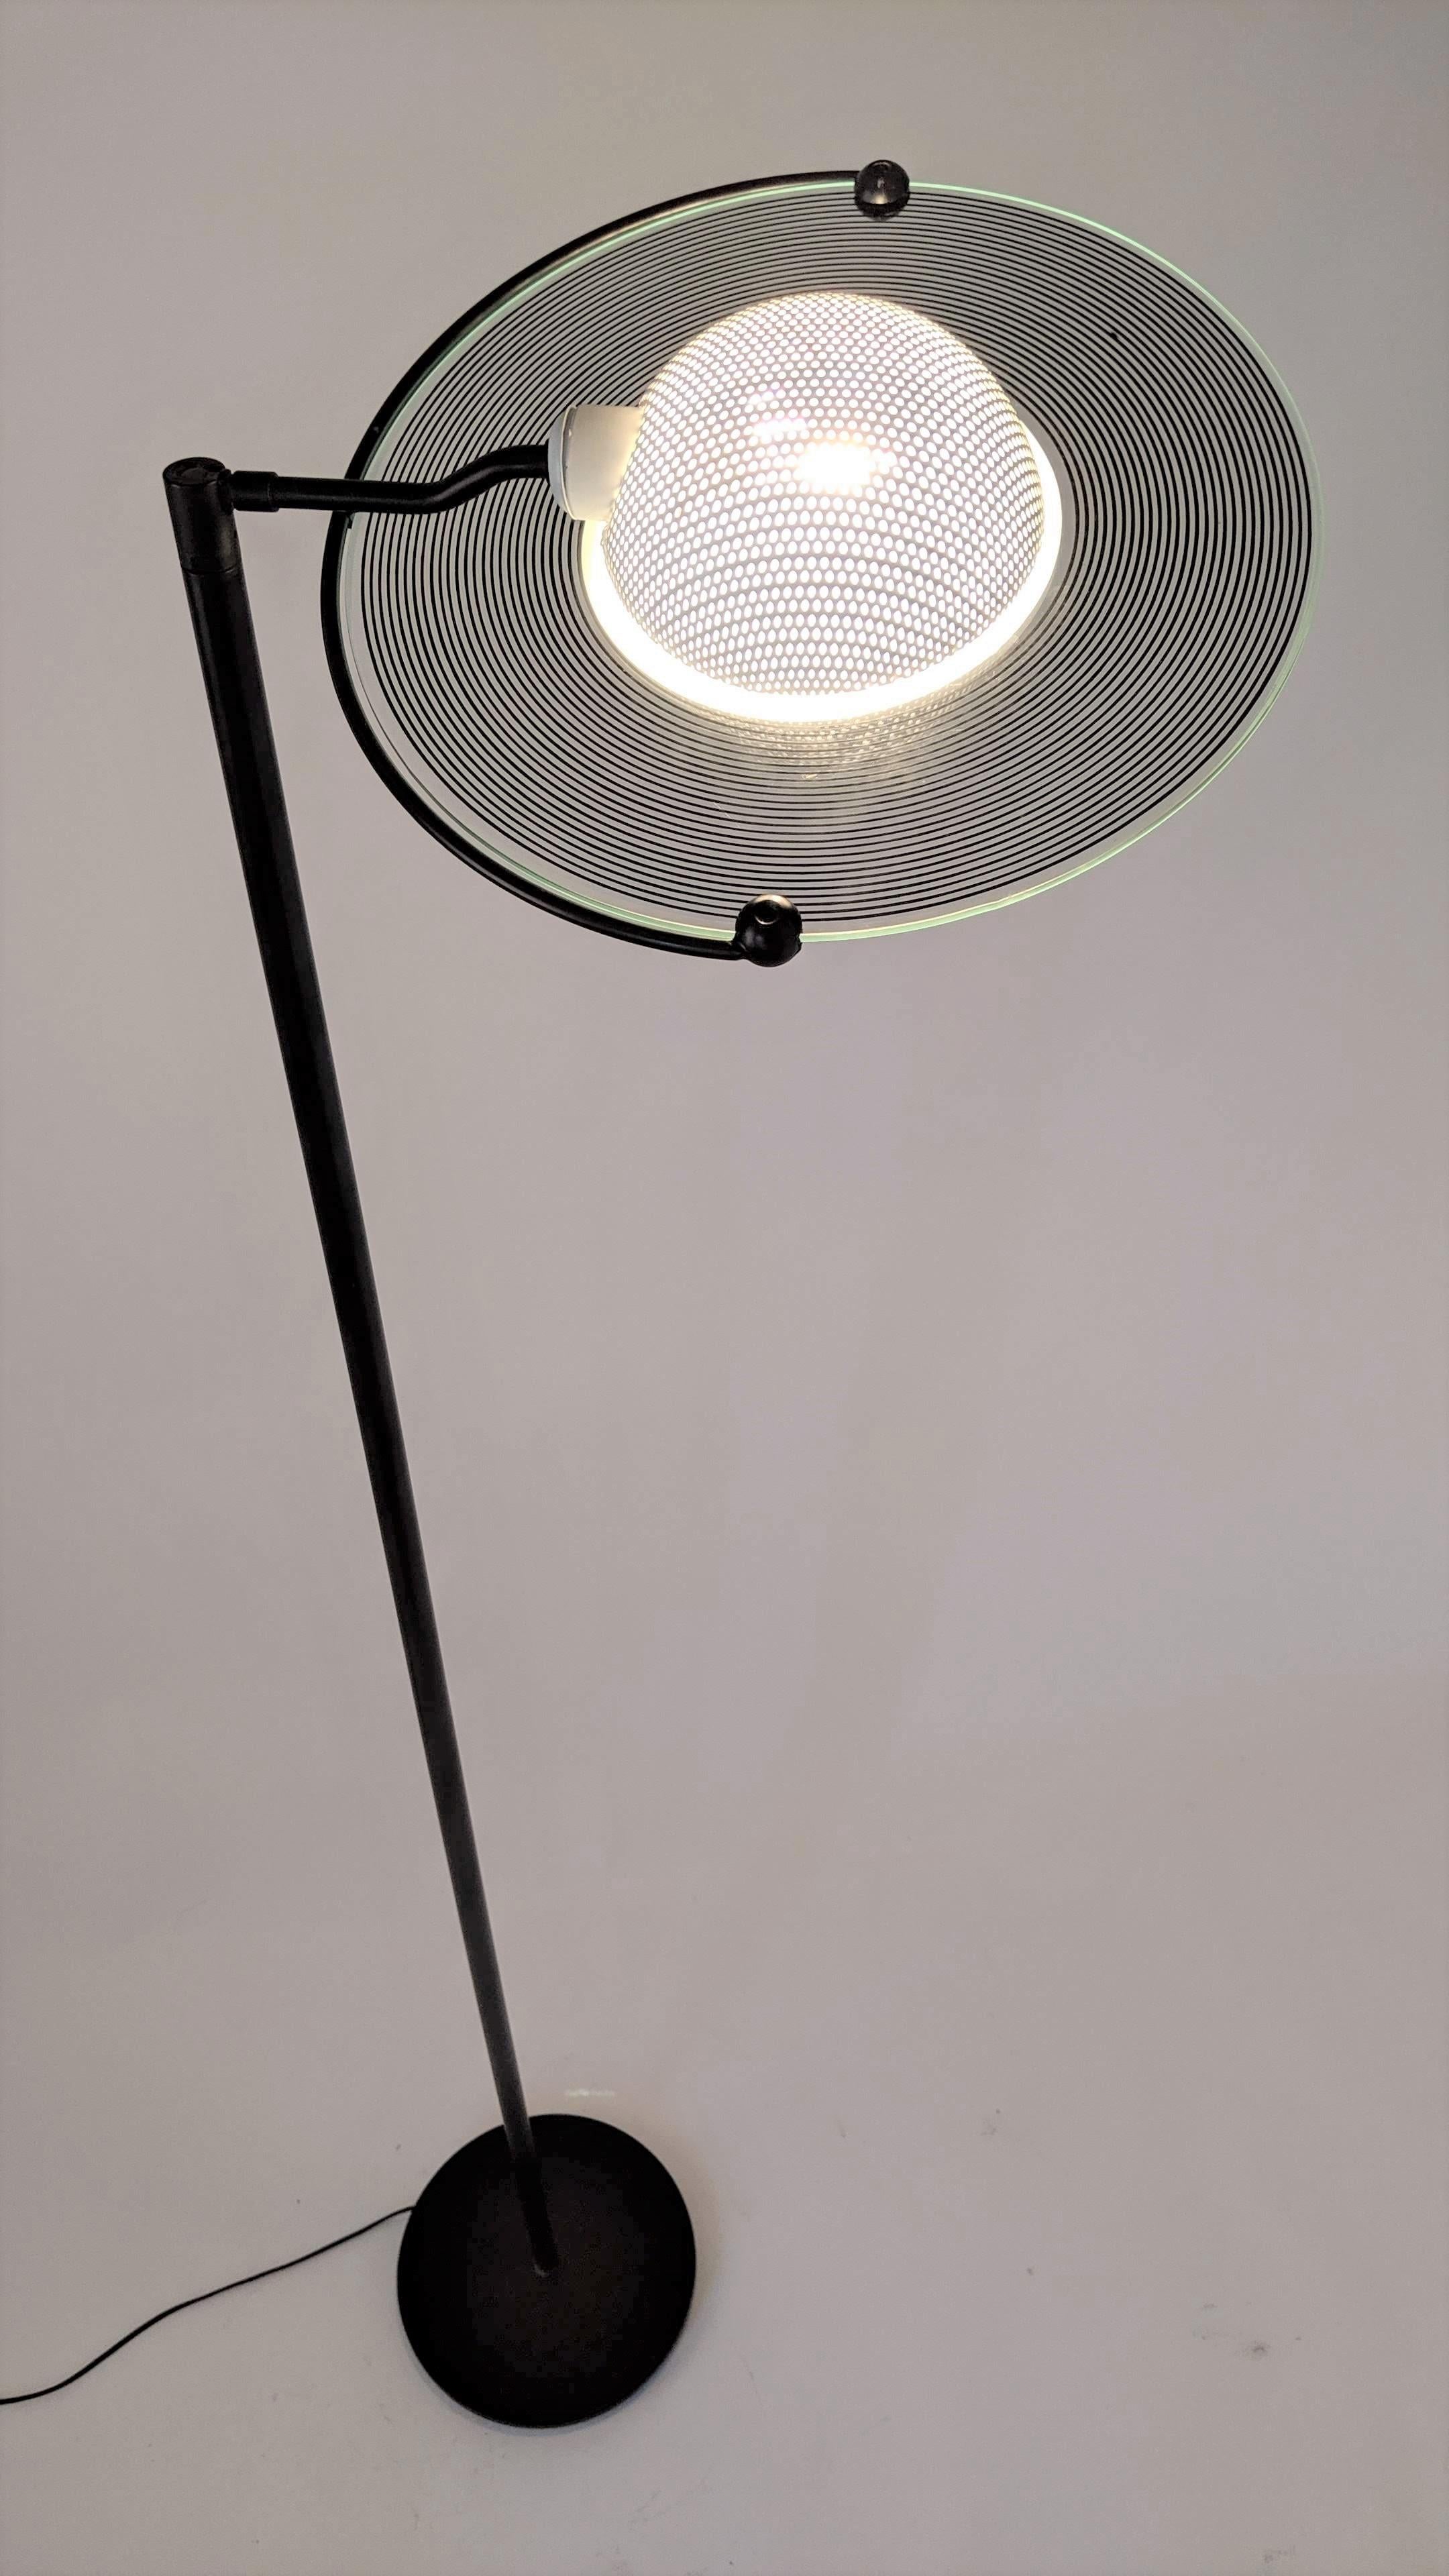 Italian halogen floor lamp made with prime quality material.

Well made solid construction.

Opale convex glass shade with black stripes printed in clear glass to create multiple ring effect. 

Enameled pierced convex metal hardware under